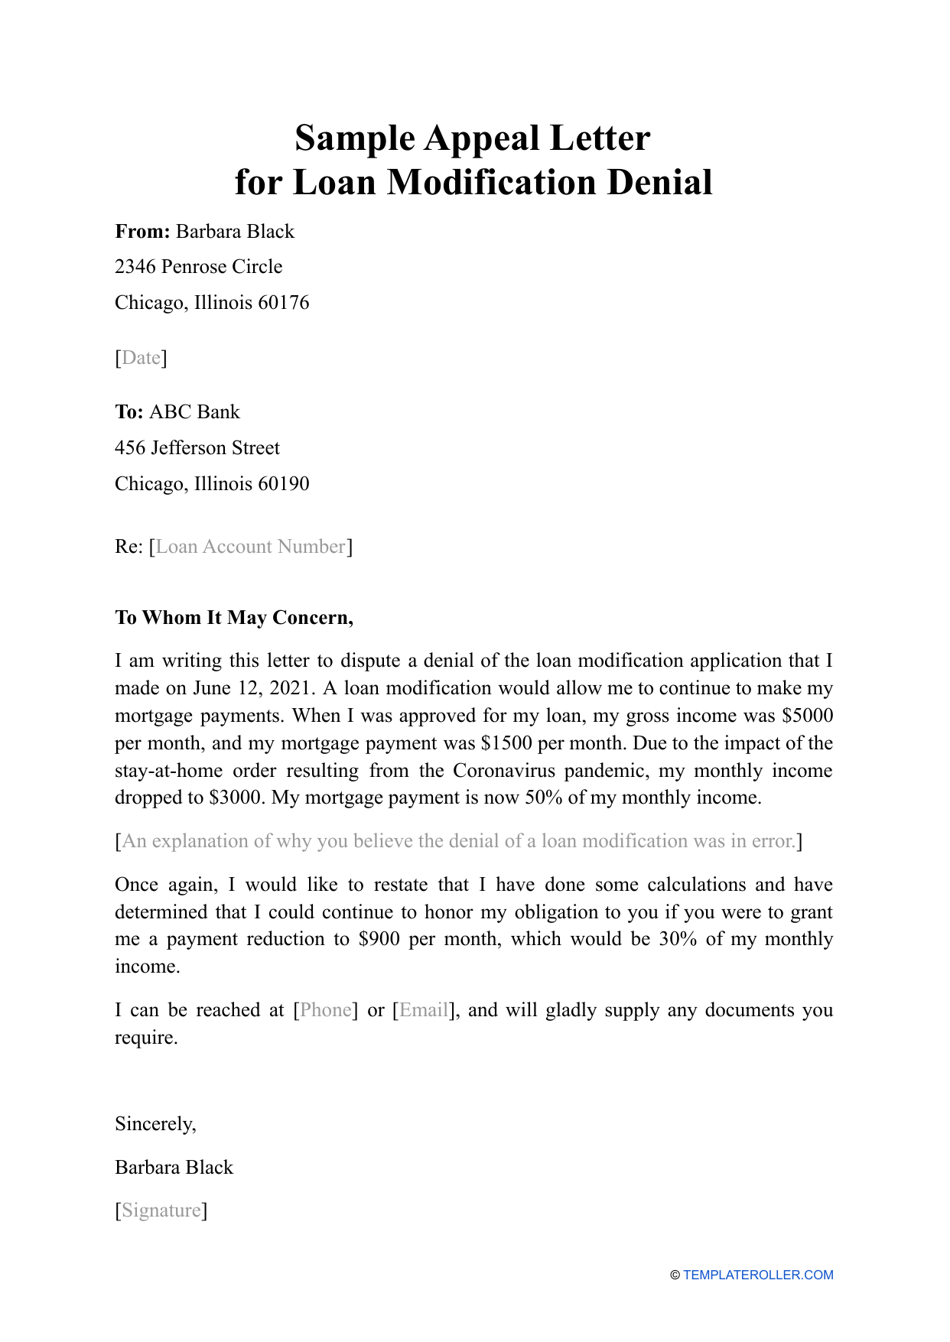 Sample Appeal Letter for Loan Modification Denial Download Printable PDF Templateroller